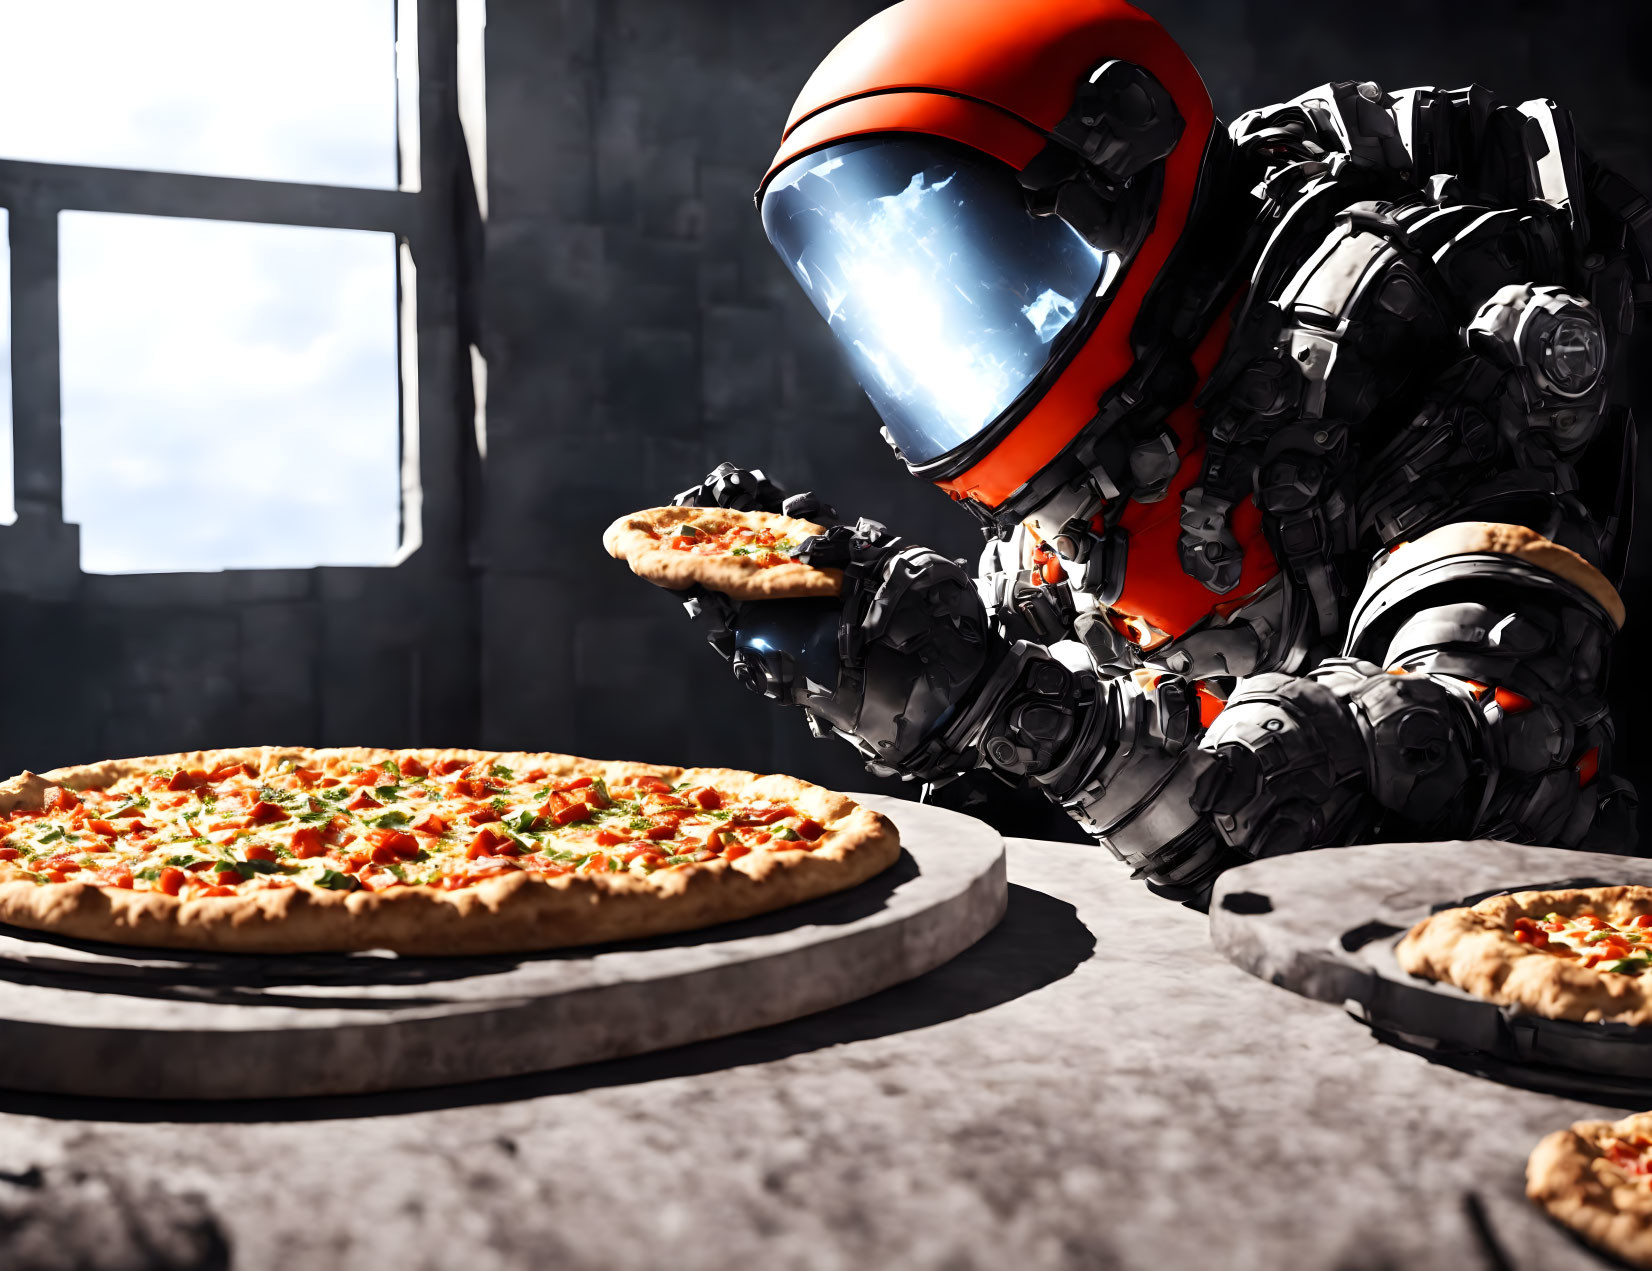 Futuristic black-and-orange armored robot reaching for pepperoni pizza slices